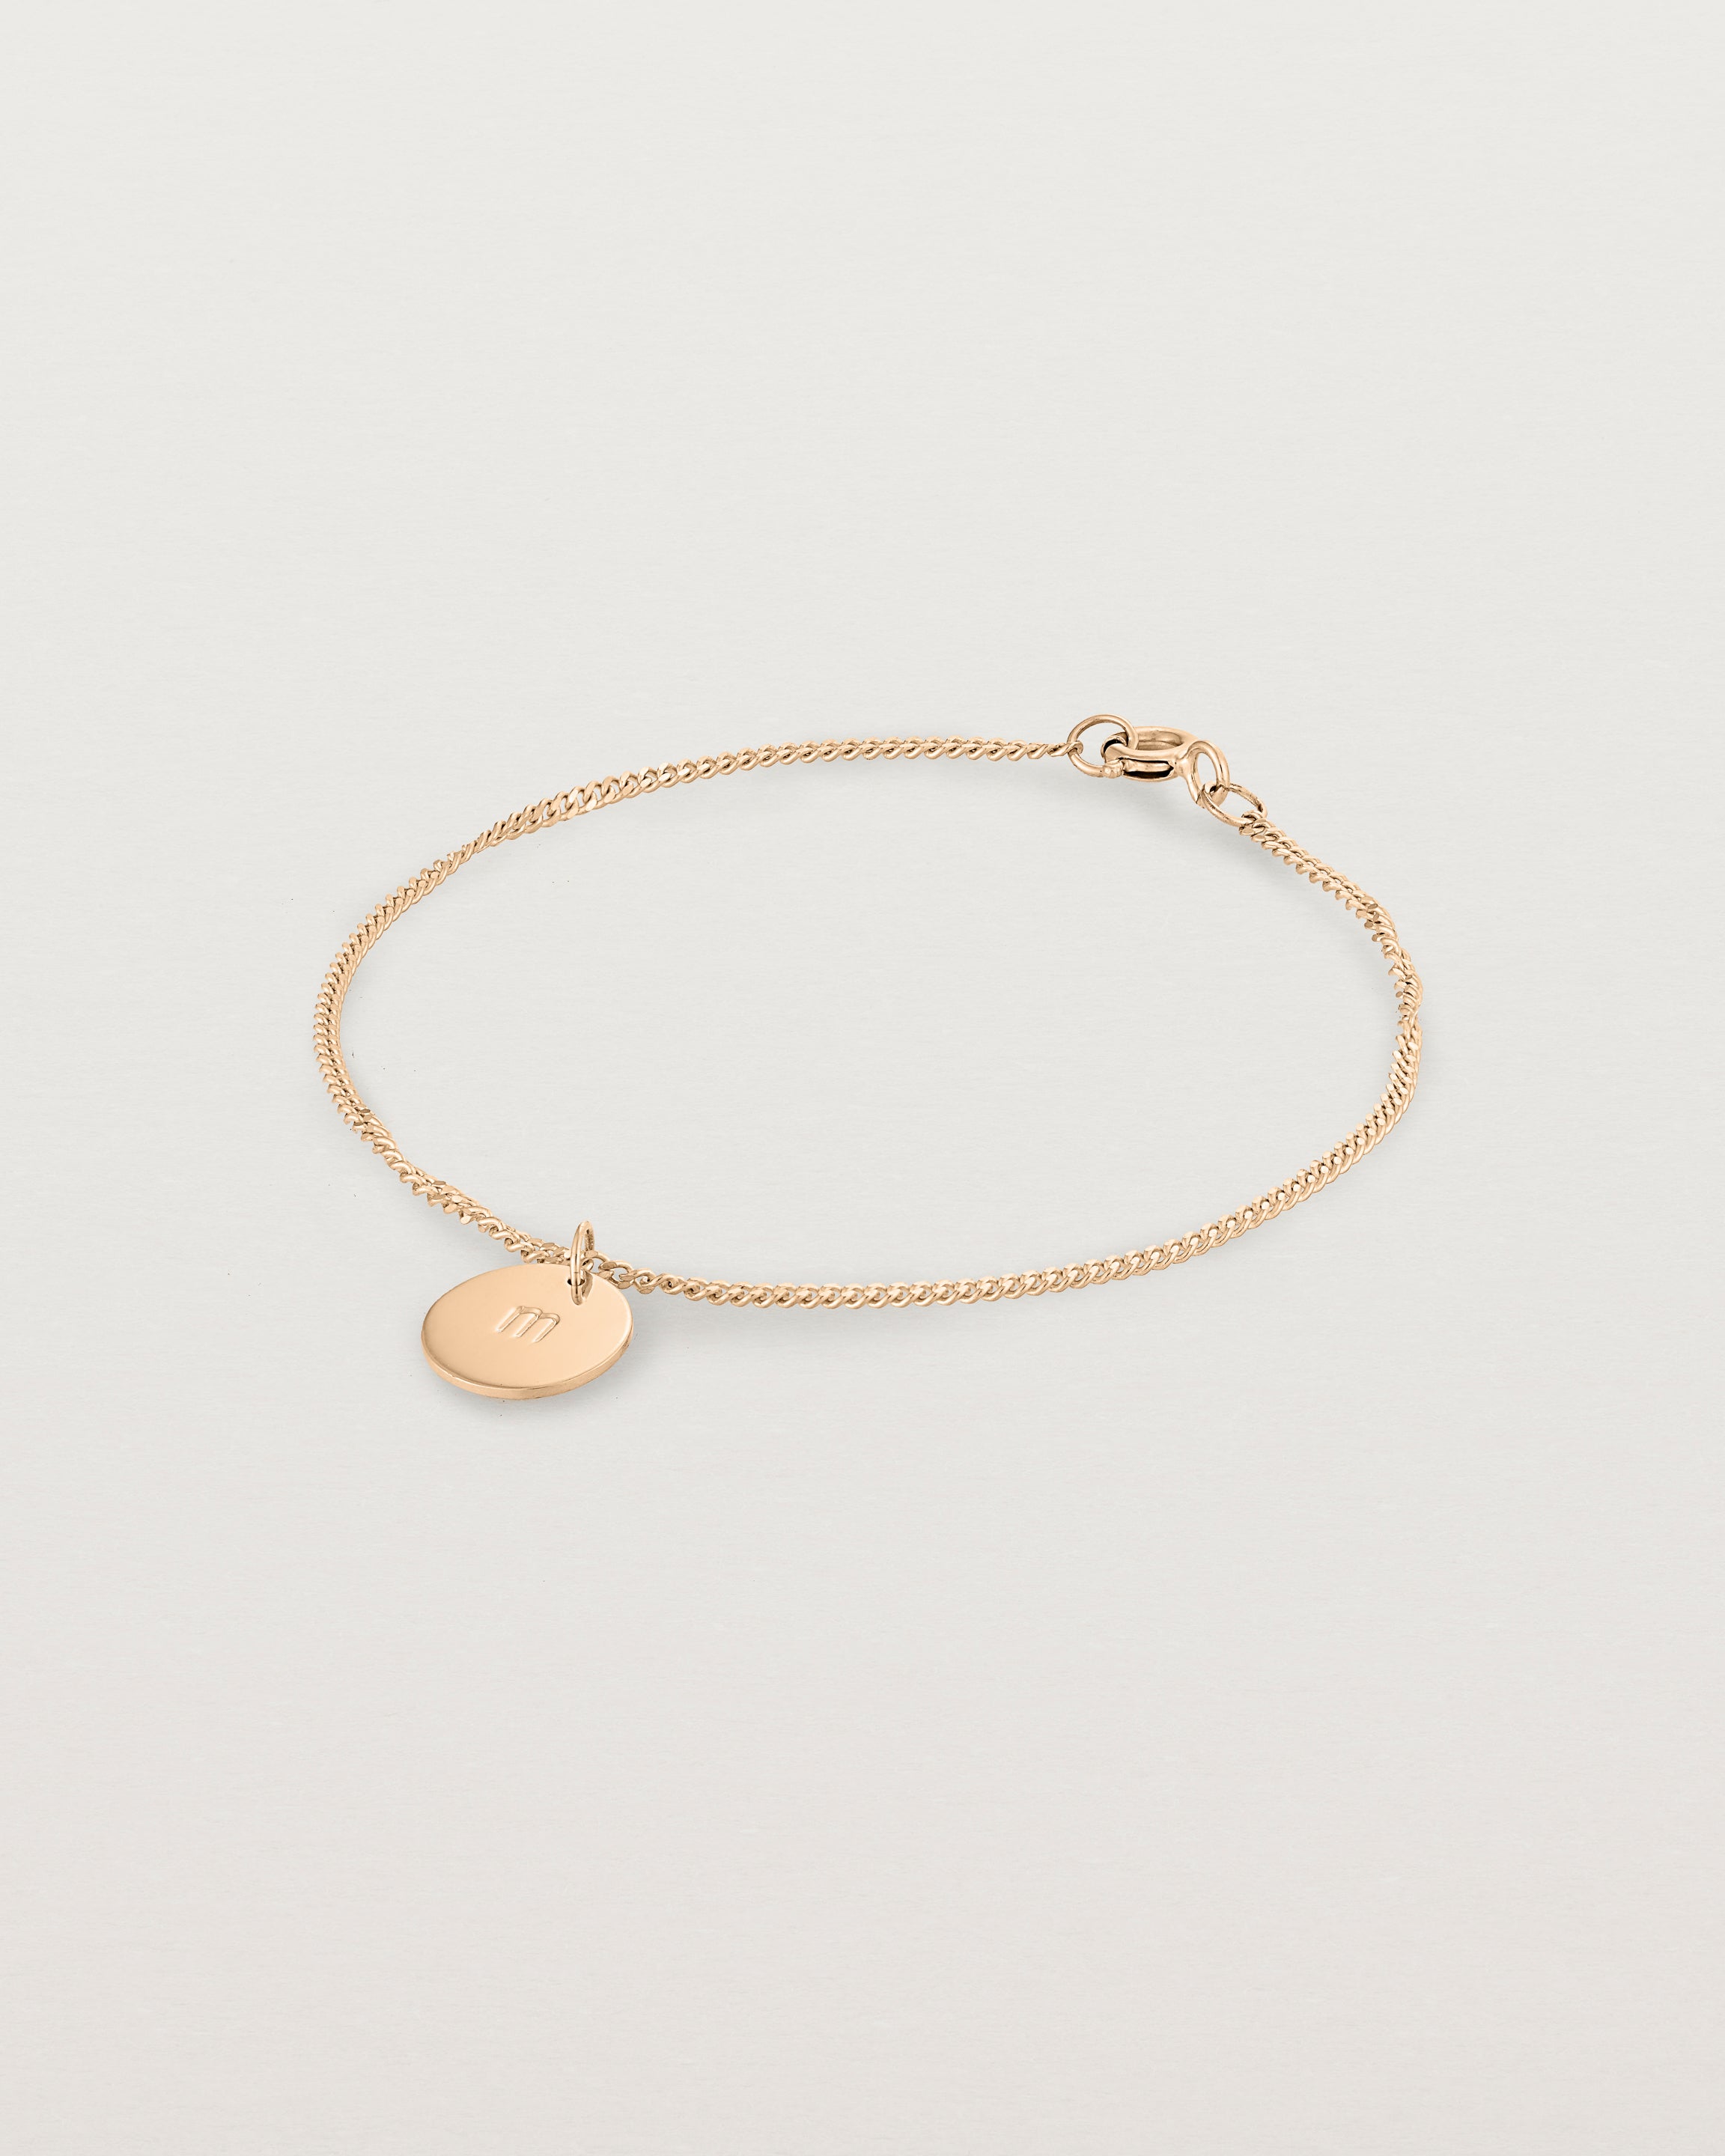 A rose rose chain bracelet featuring a disc with an engraved letter m